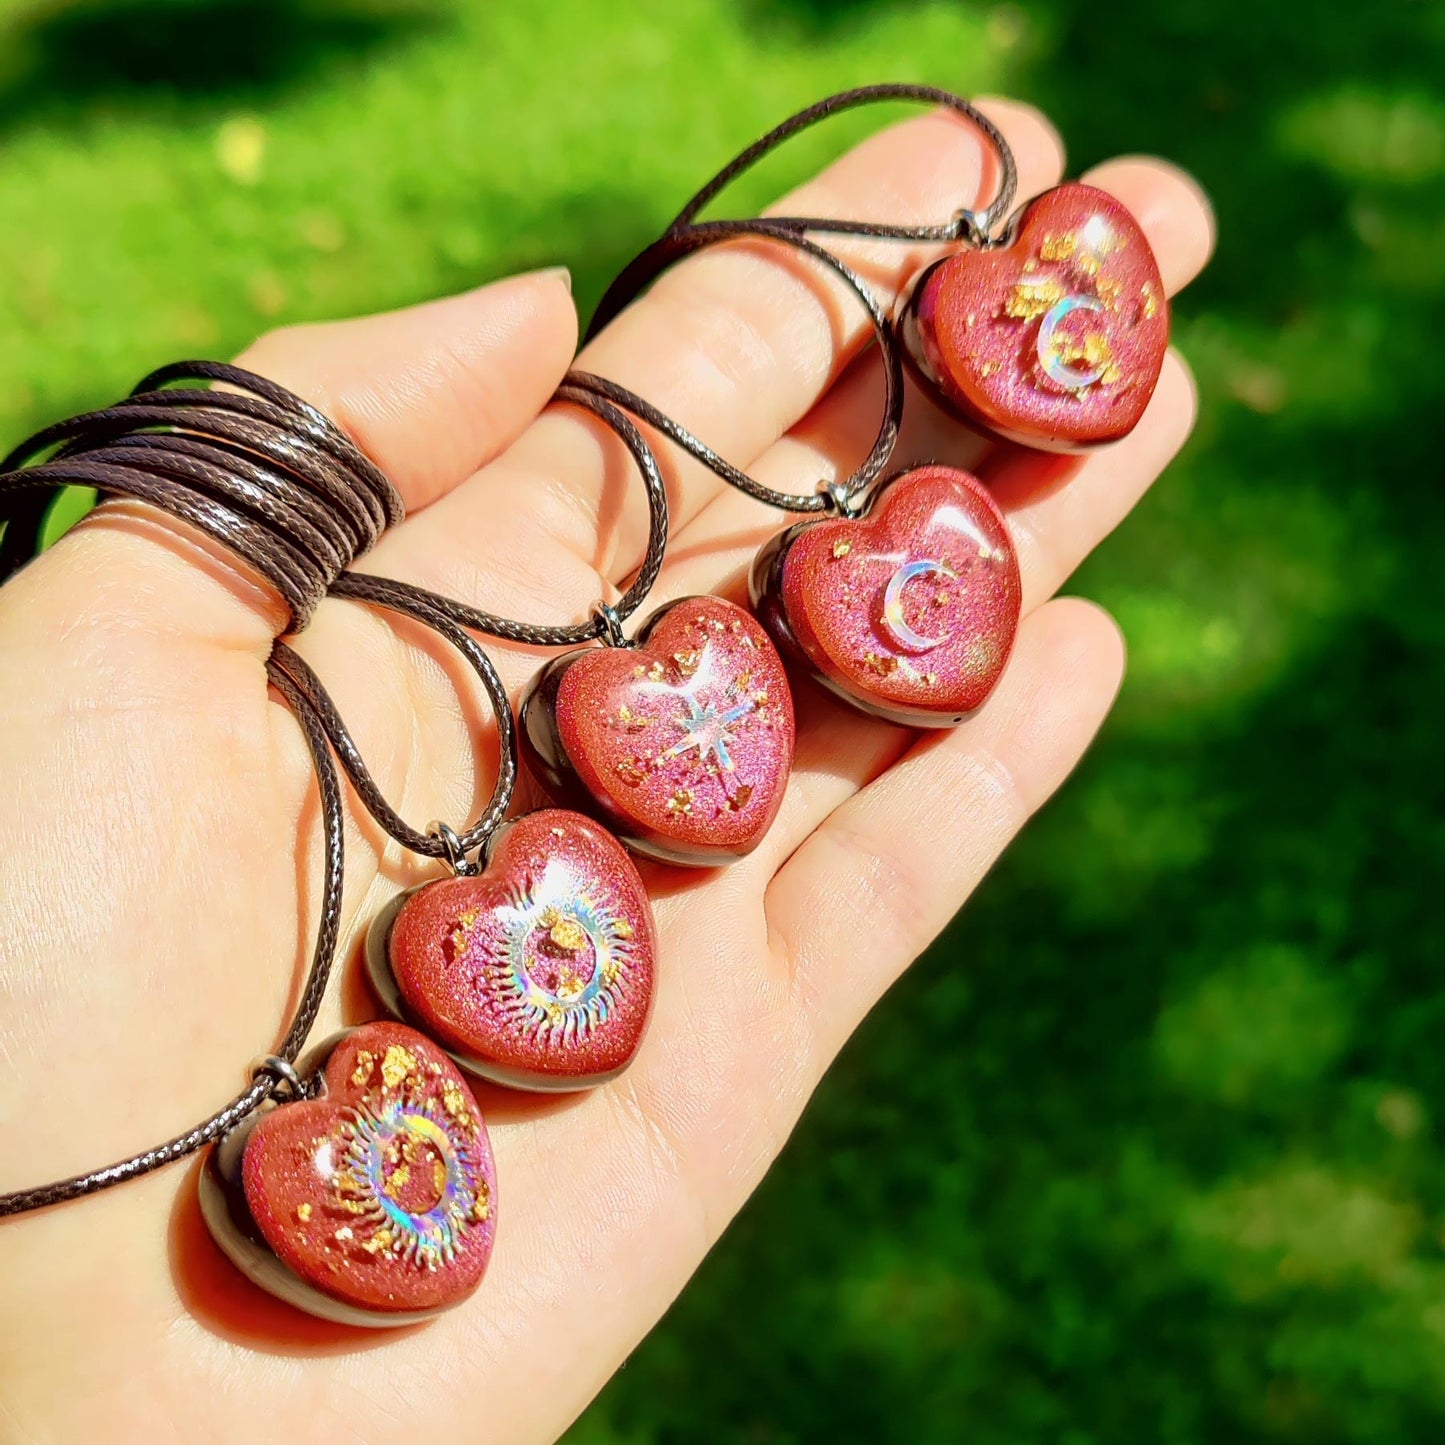 Kids or Pets Heart Shape Orgonite Necklace with Celestial Symbols For Root Chakra